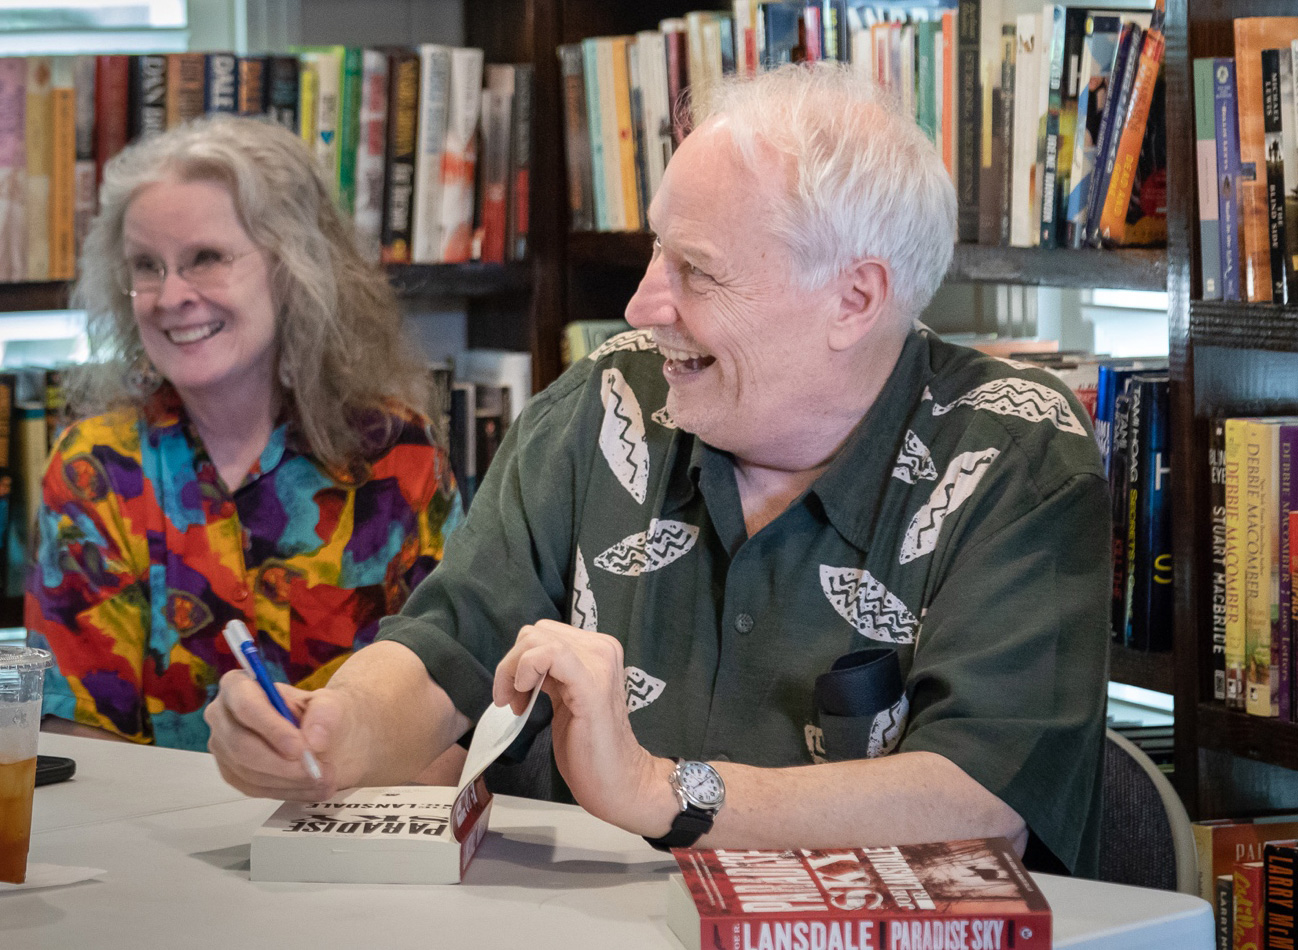 Joe Lansdale at a book signing in Kilgore in May